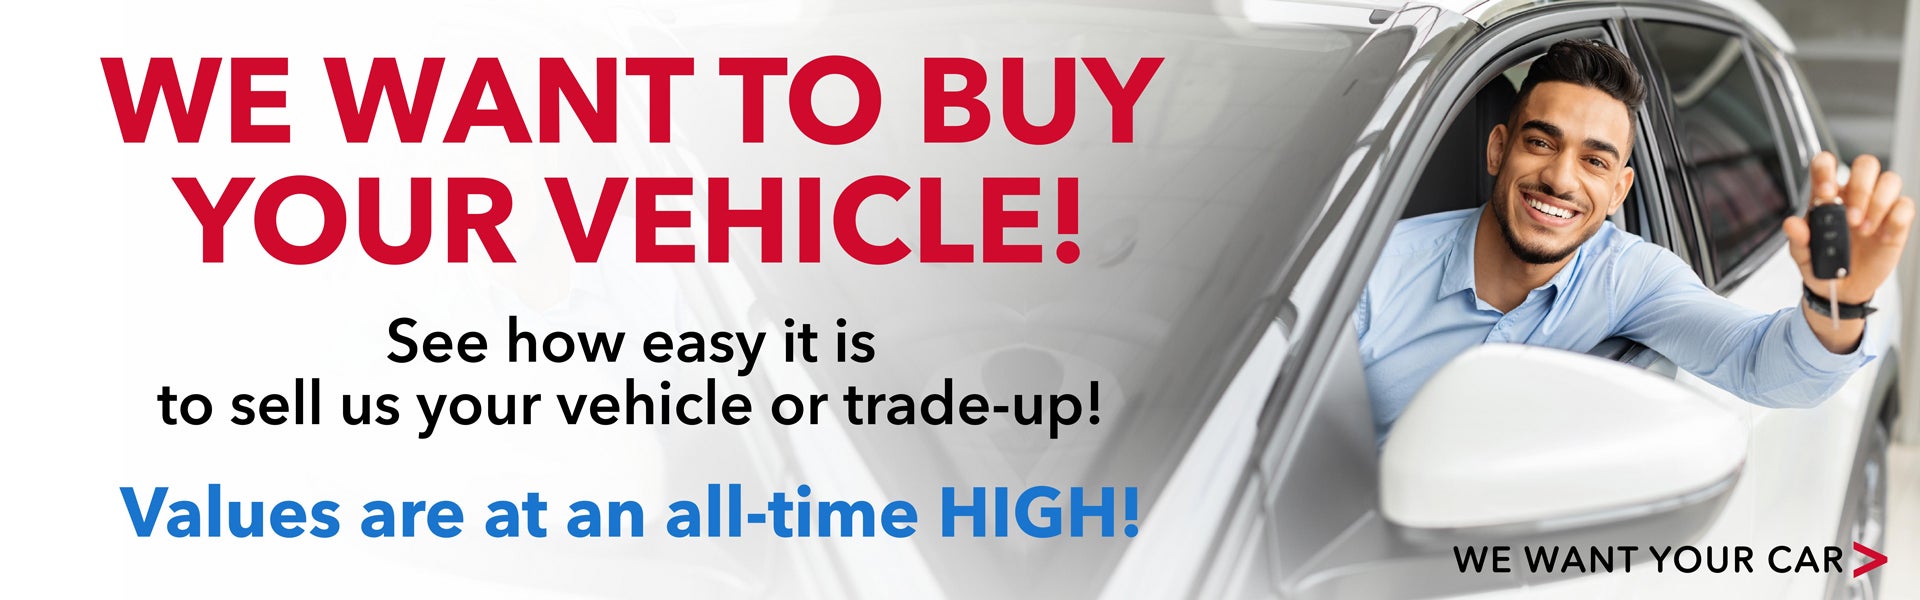 WE WANT TO BUY YOUR VEHICLE!